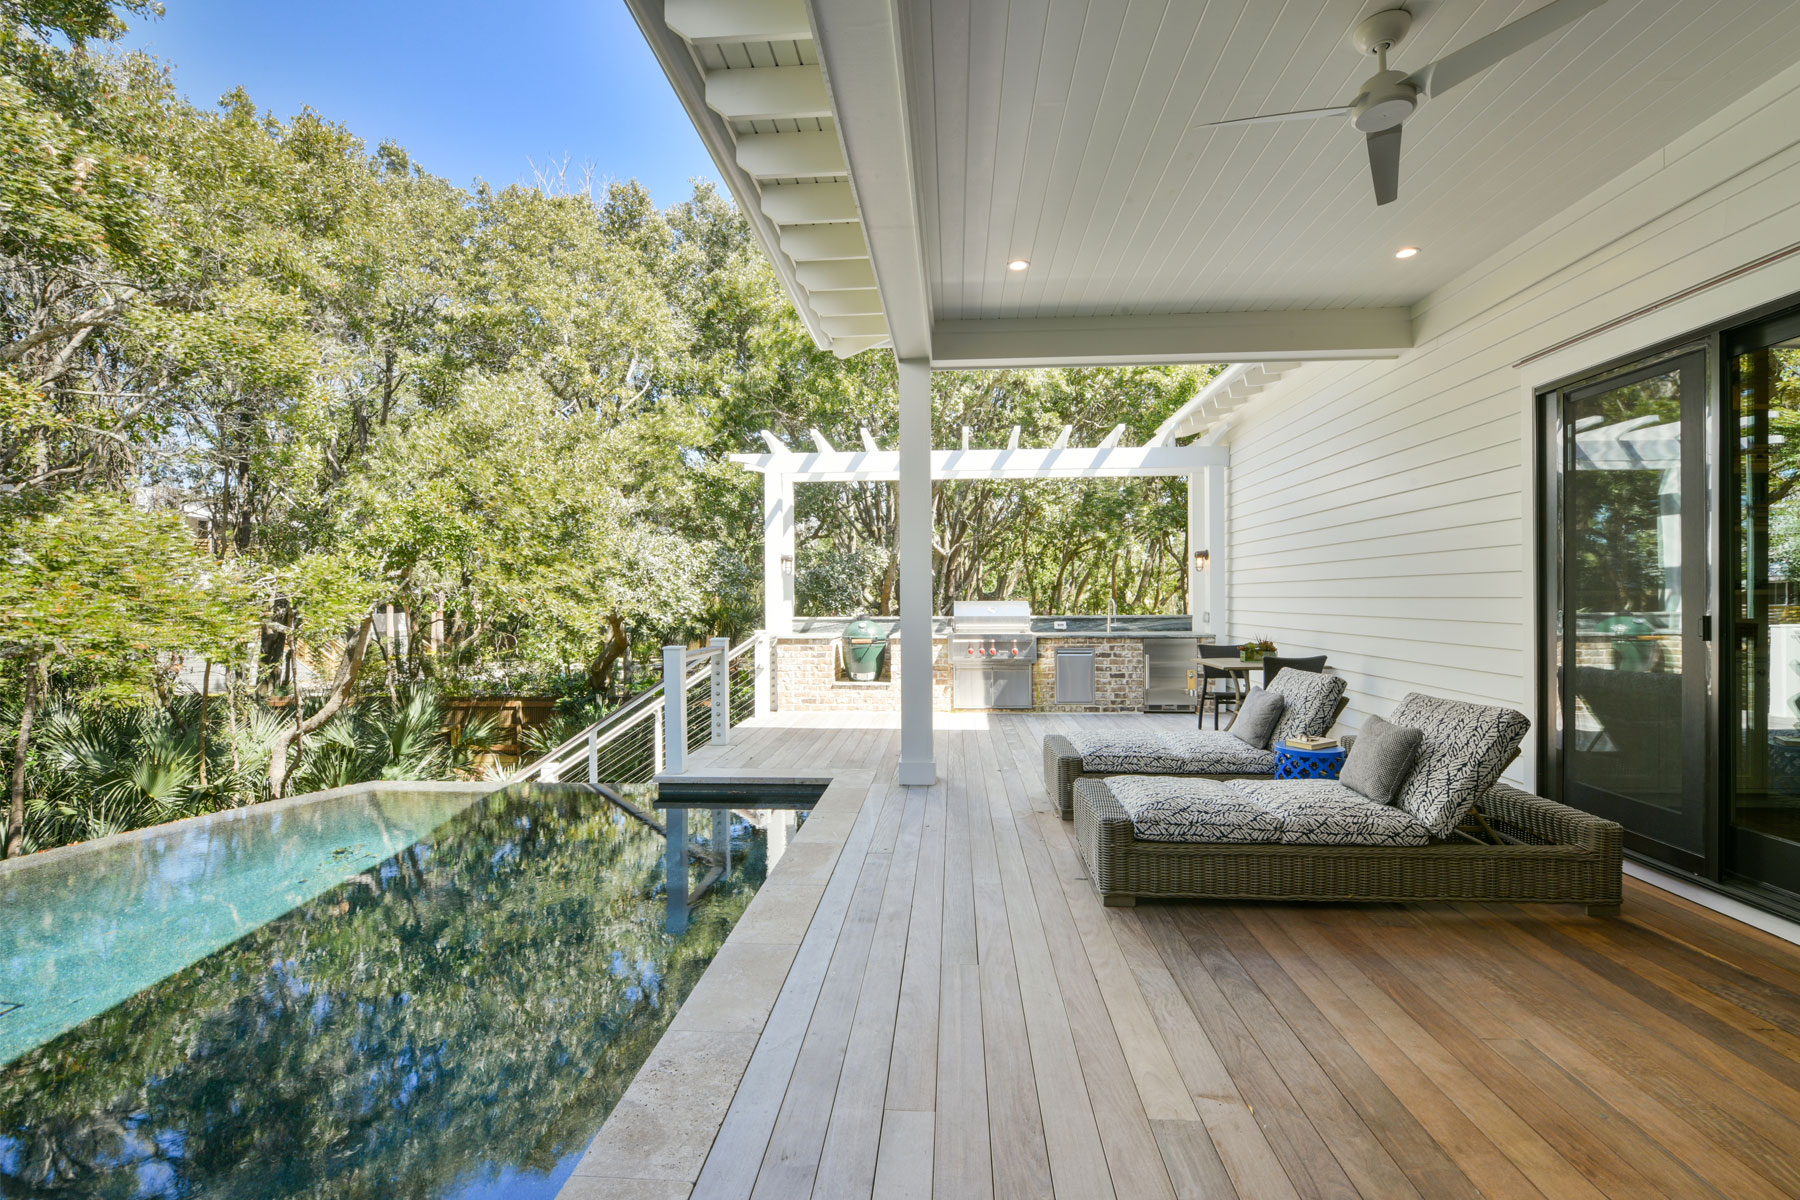 Covered porch with poolside deck